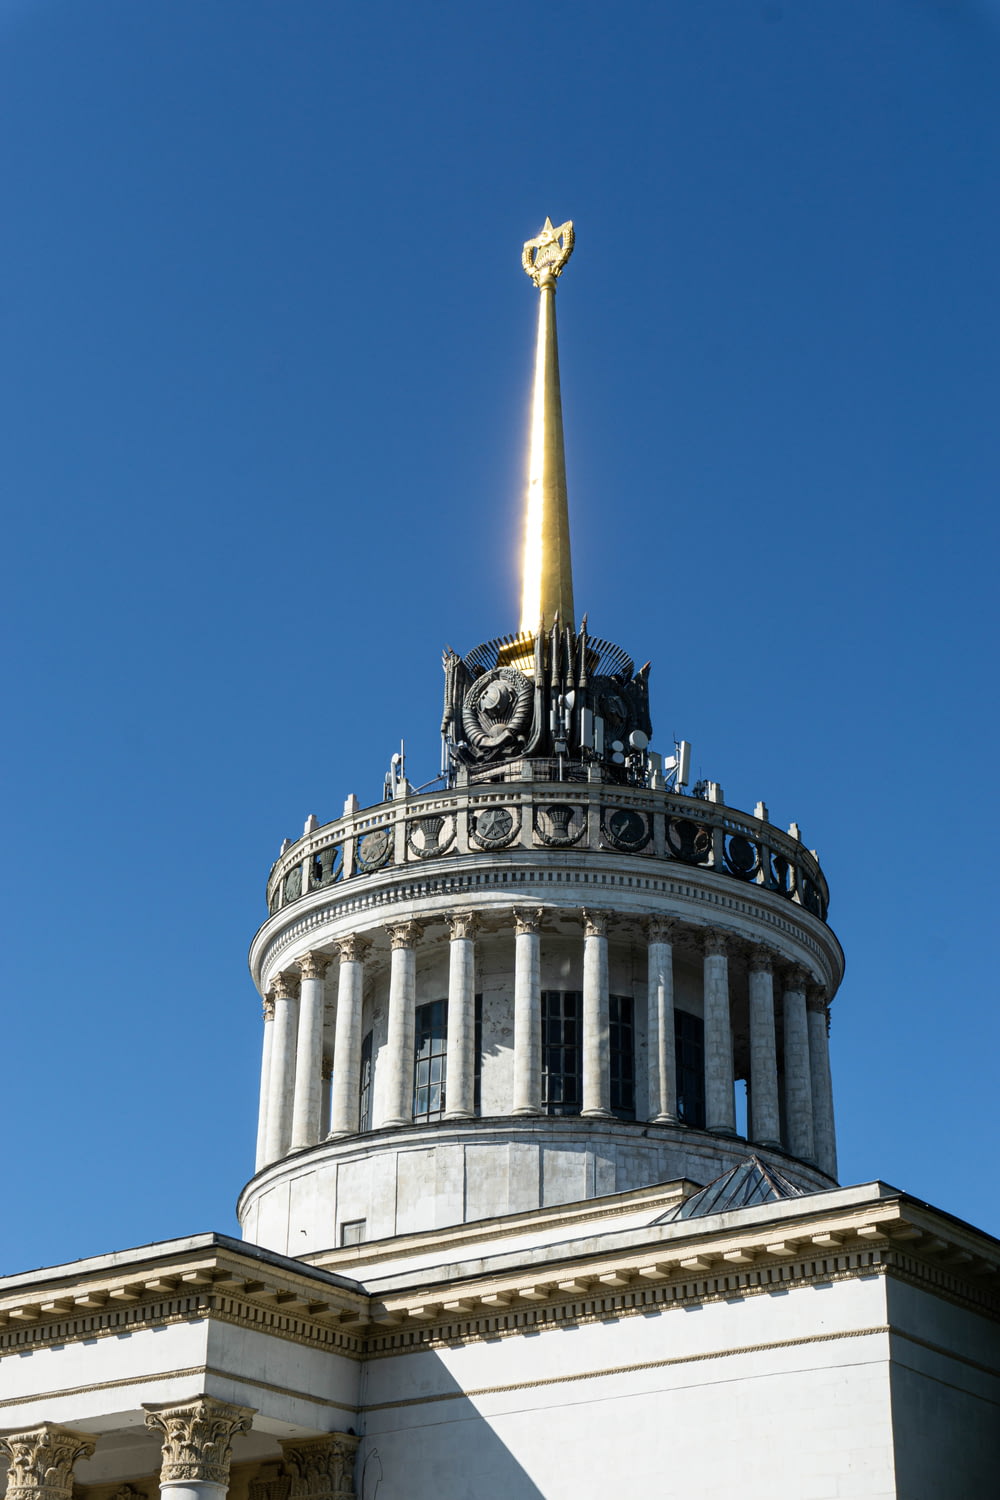 the top of a building with a golden cross on top